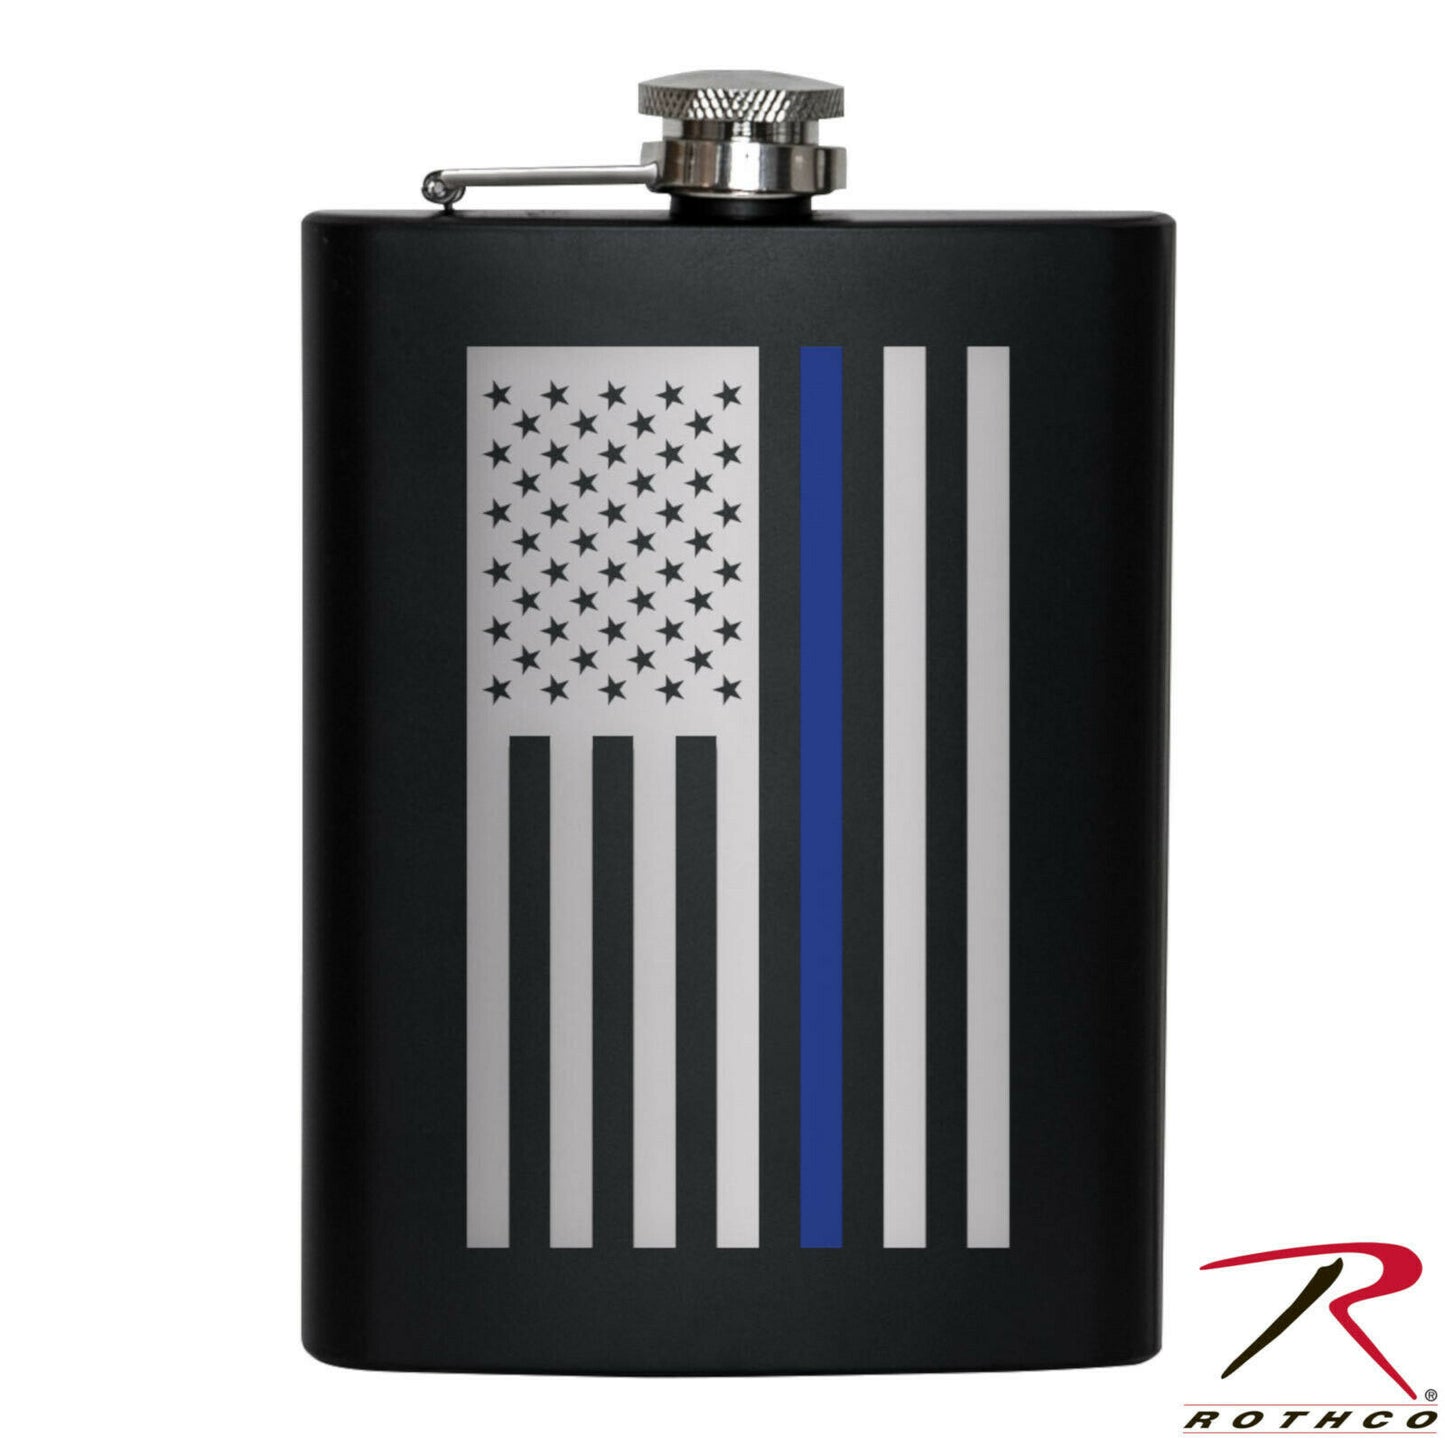 Rothco 8oz. Thin Blue Line Stainless Steel Black Flask w/ Hinged, Screw-Off Cap